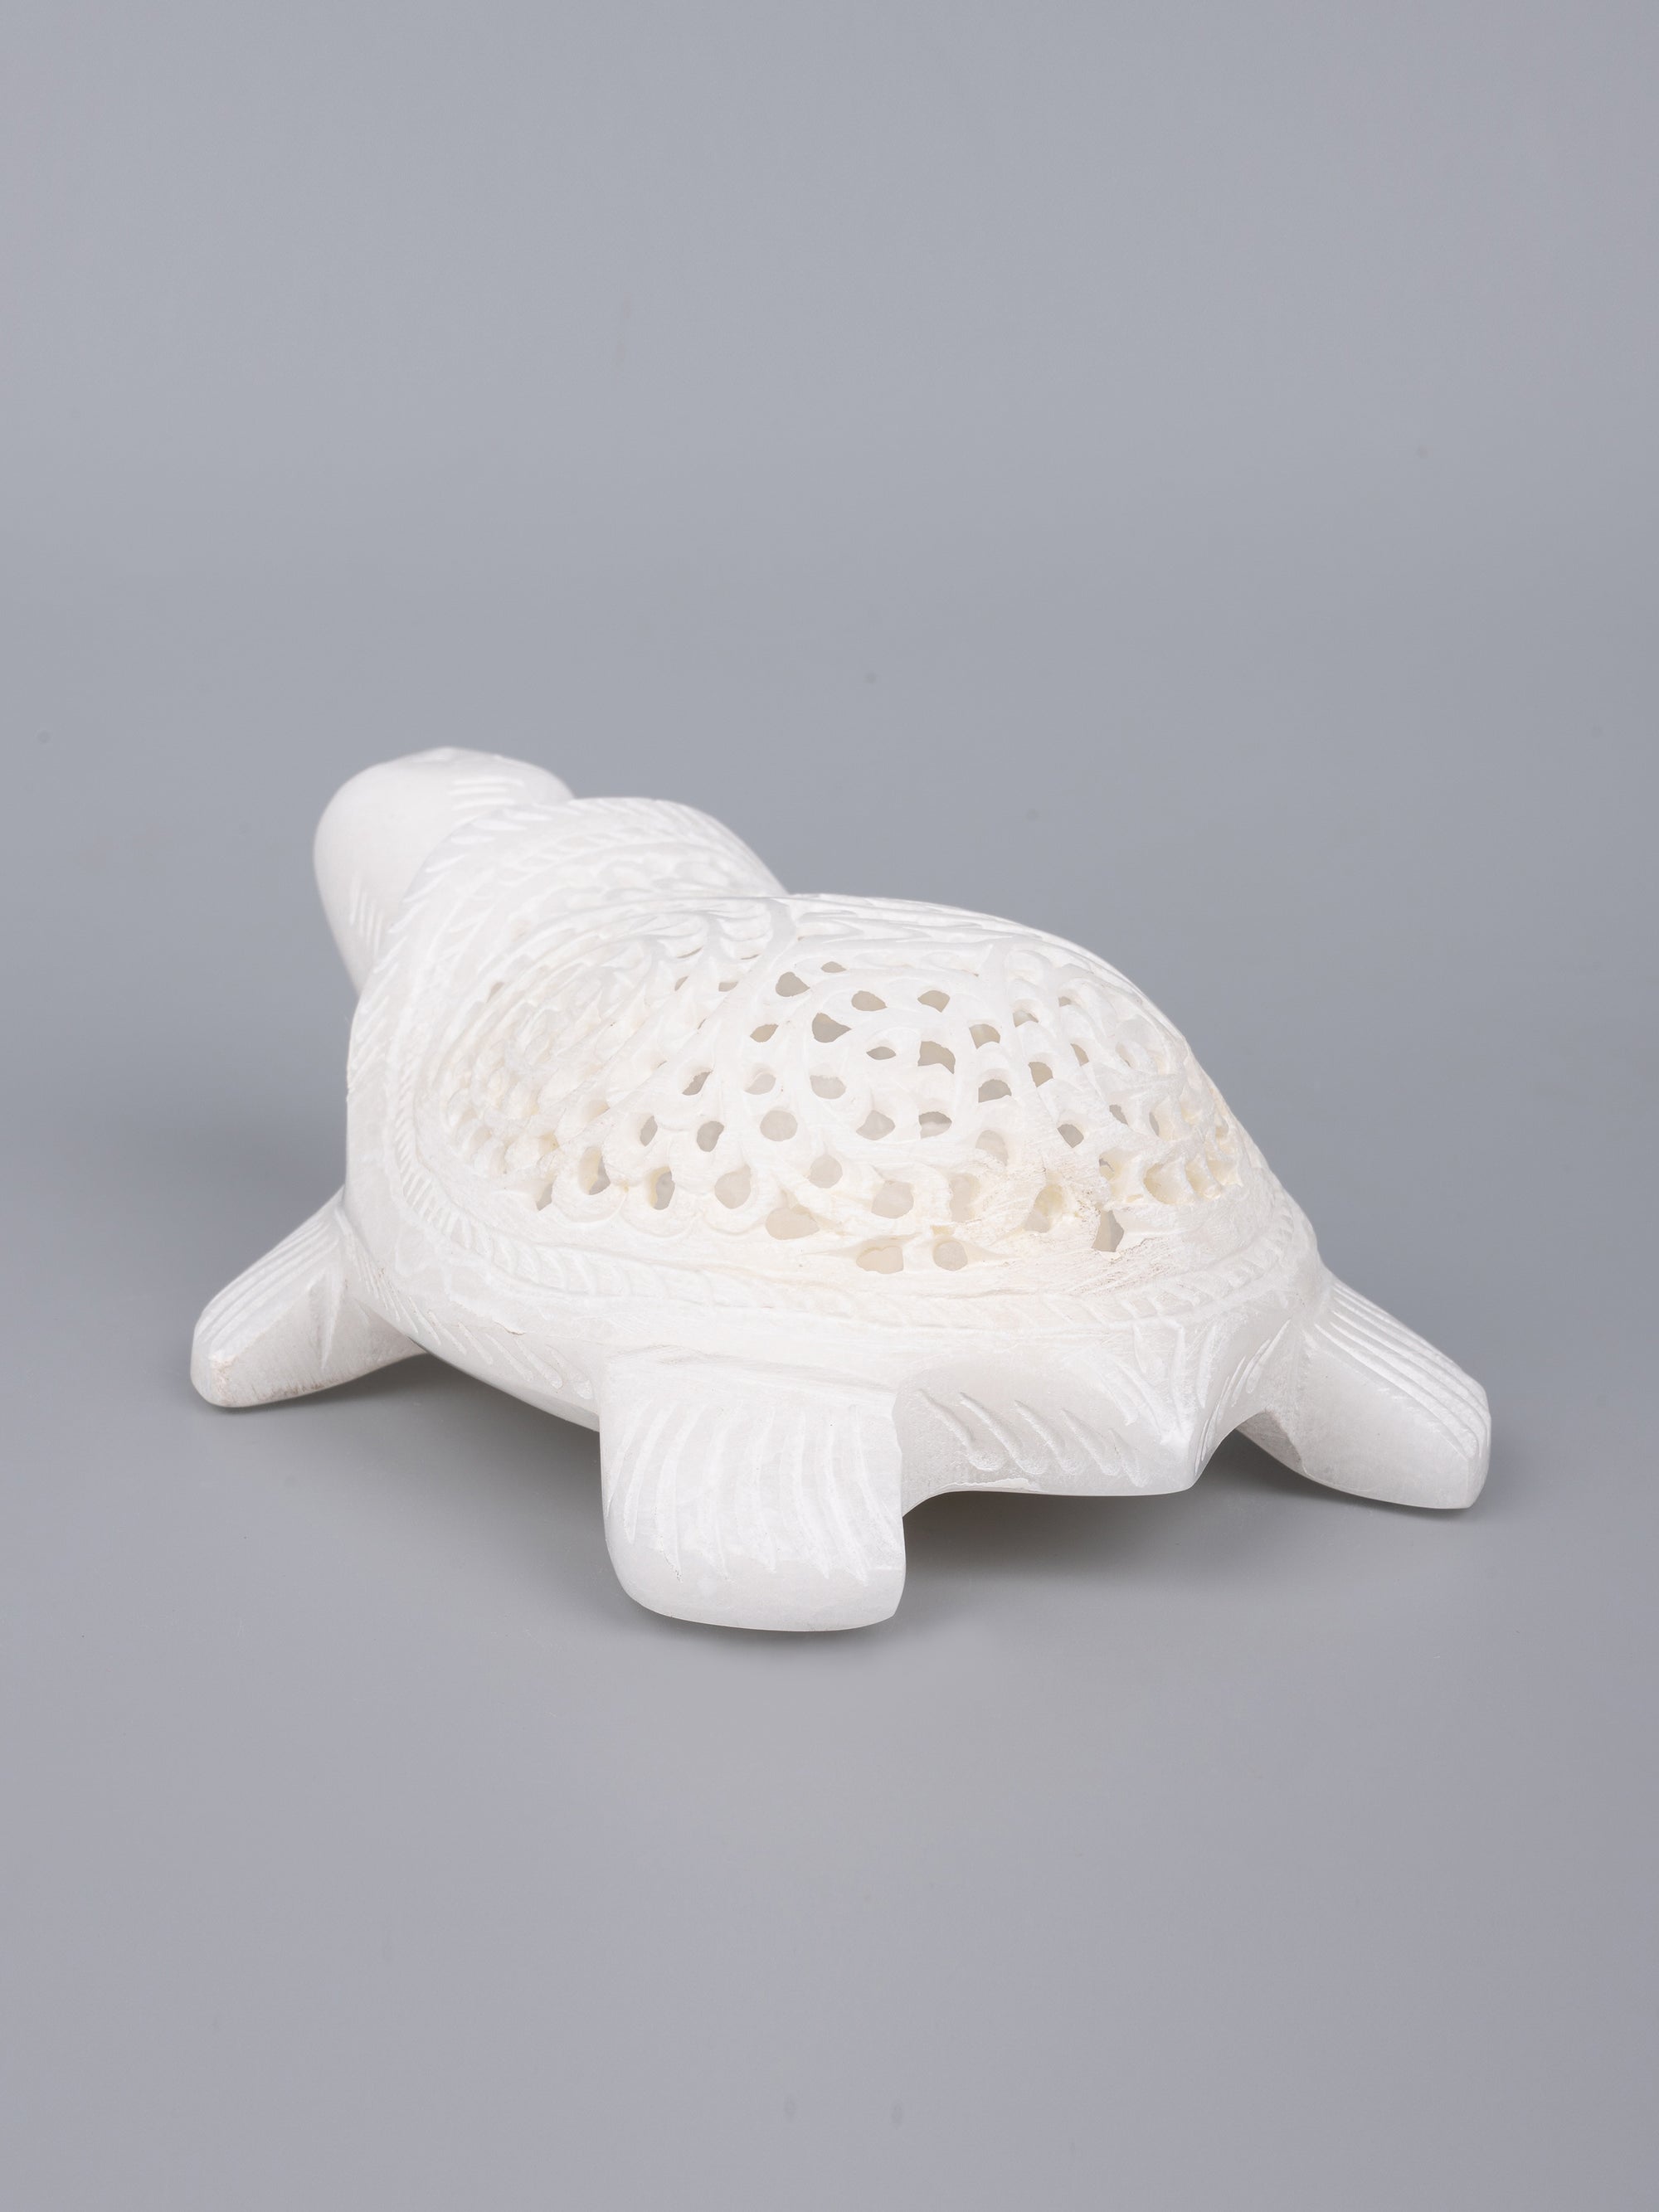 White marble turtle with decorative jali work - The Heritage Artifacts